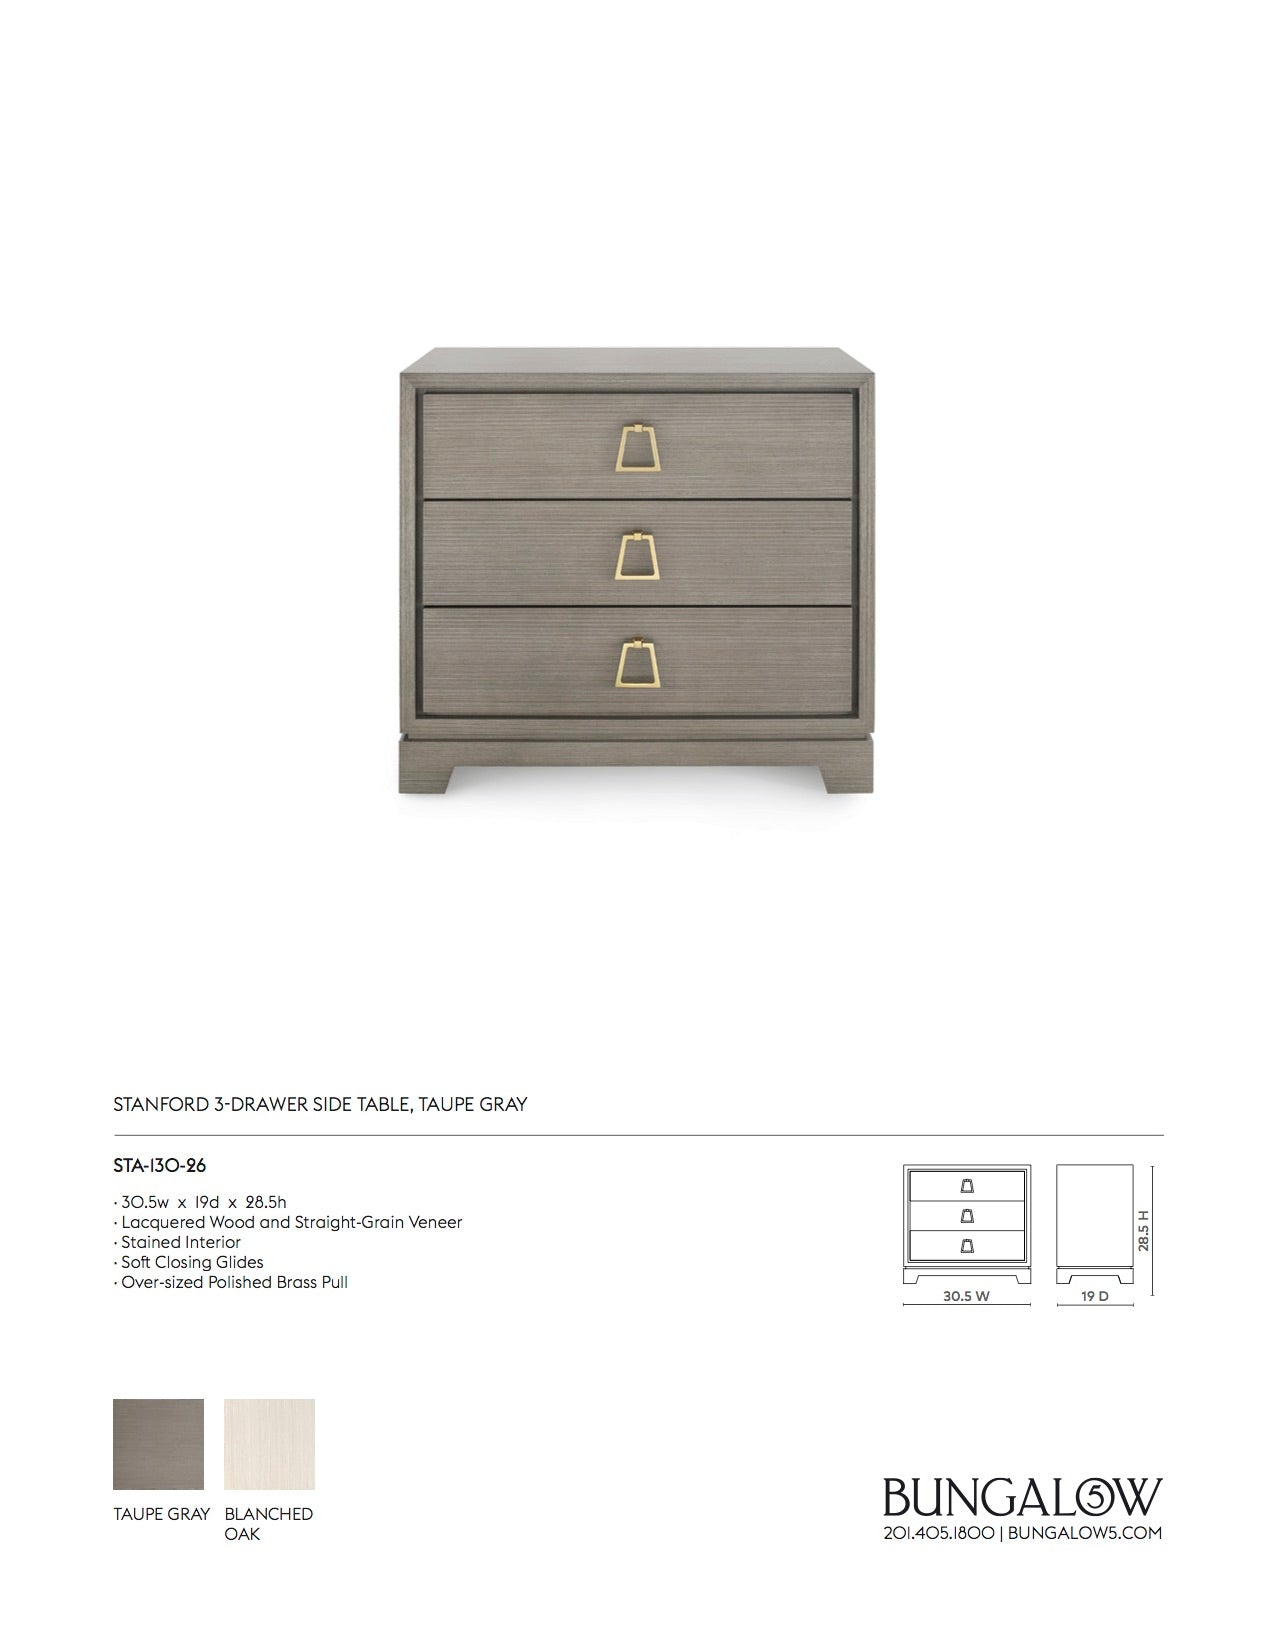 Bungalow 5 Stanford 3 Drawer Side Table Taupe Gray Tearsheet